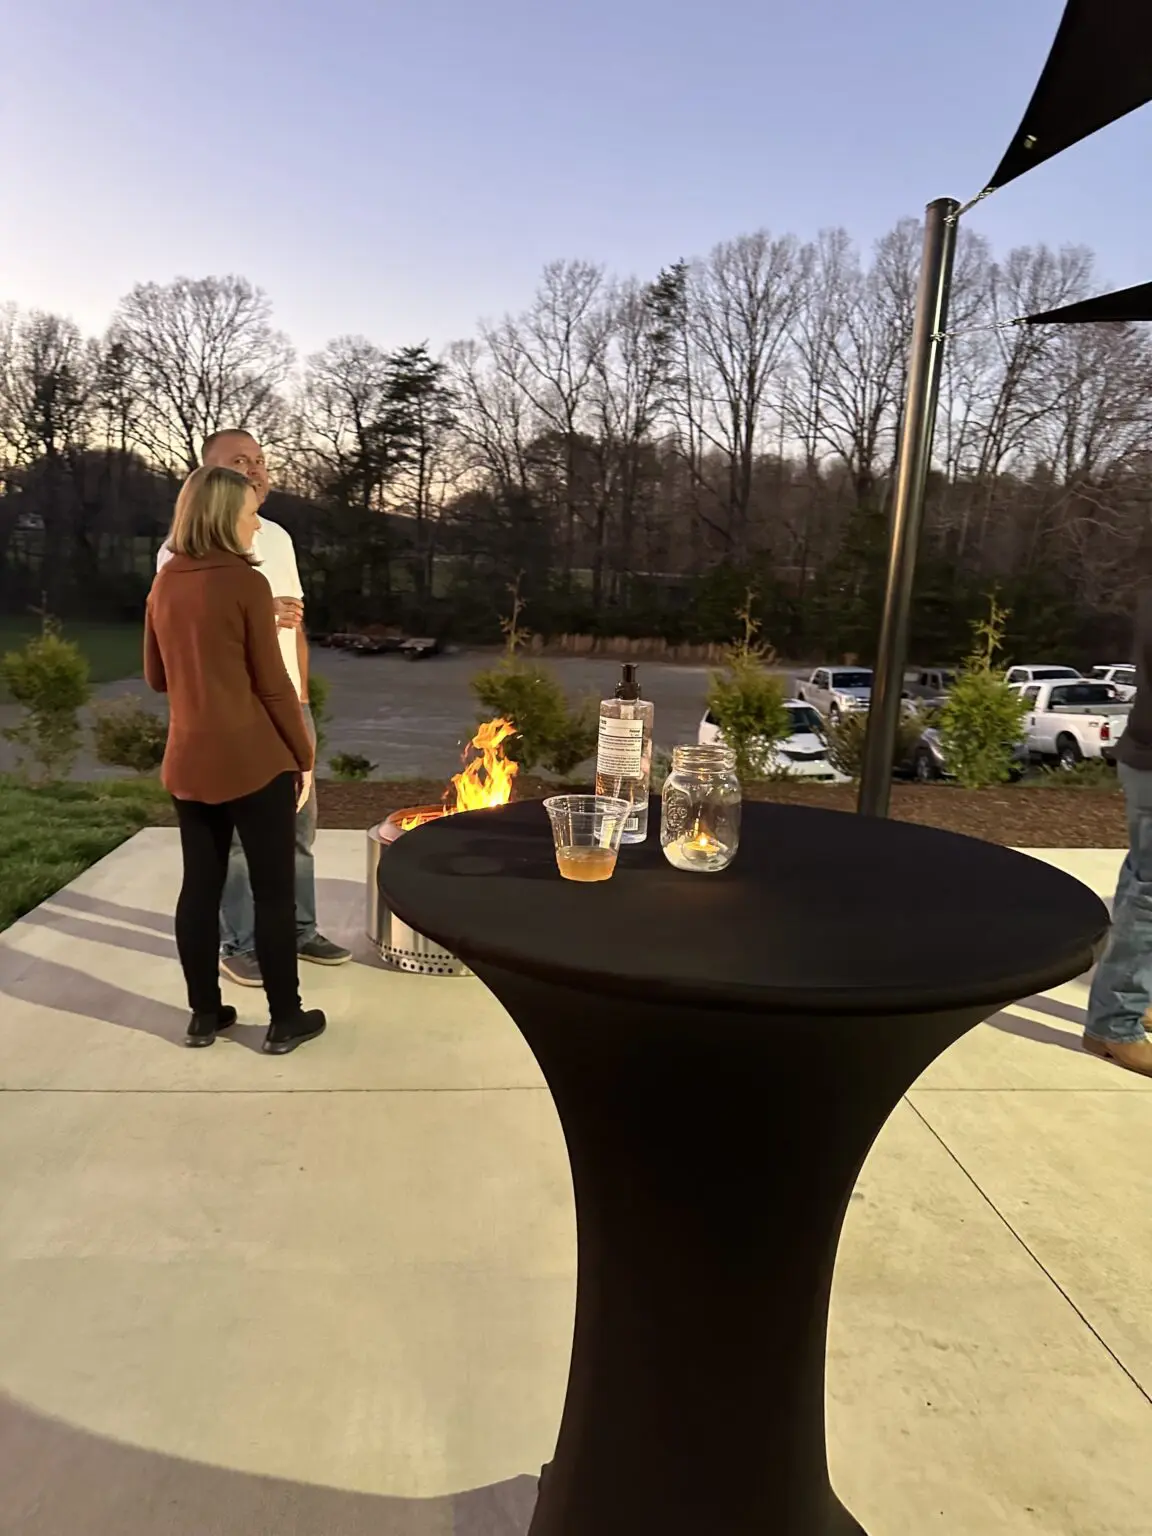 A woman standing next to an outdoor table with drinks on it.